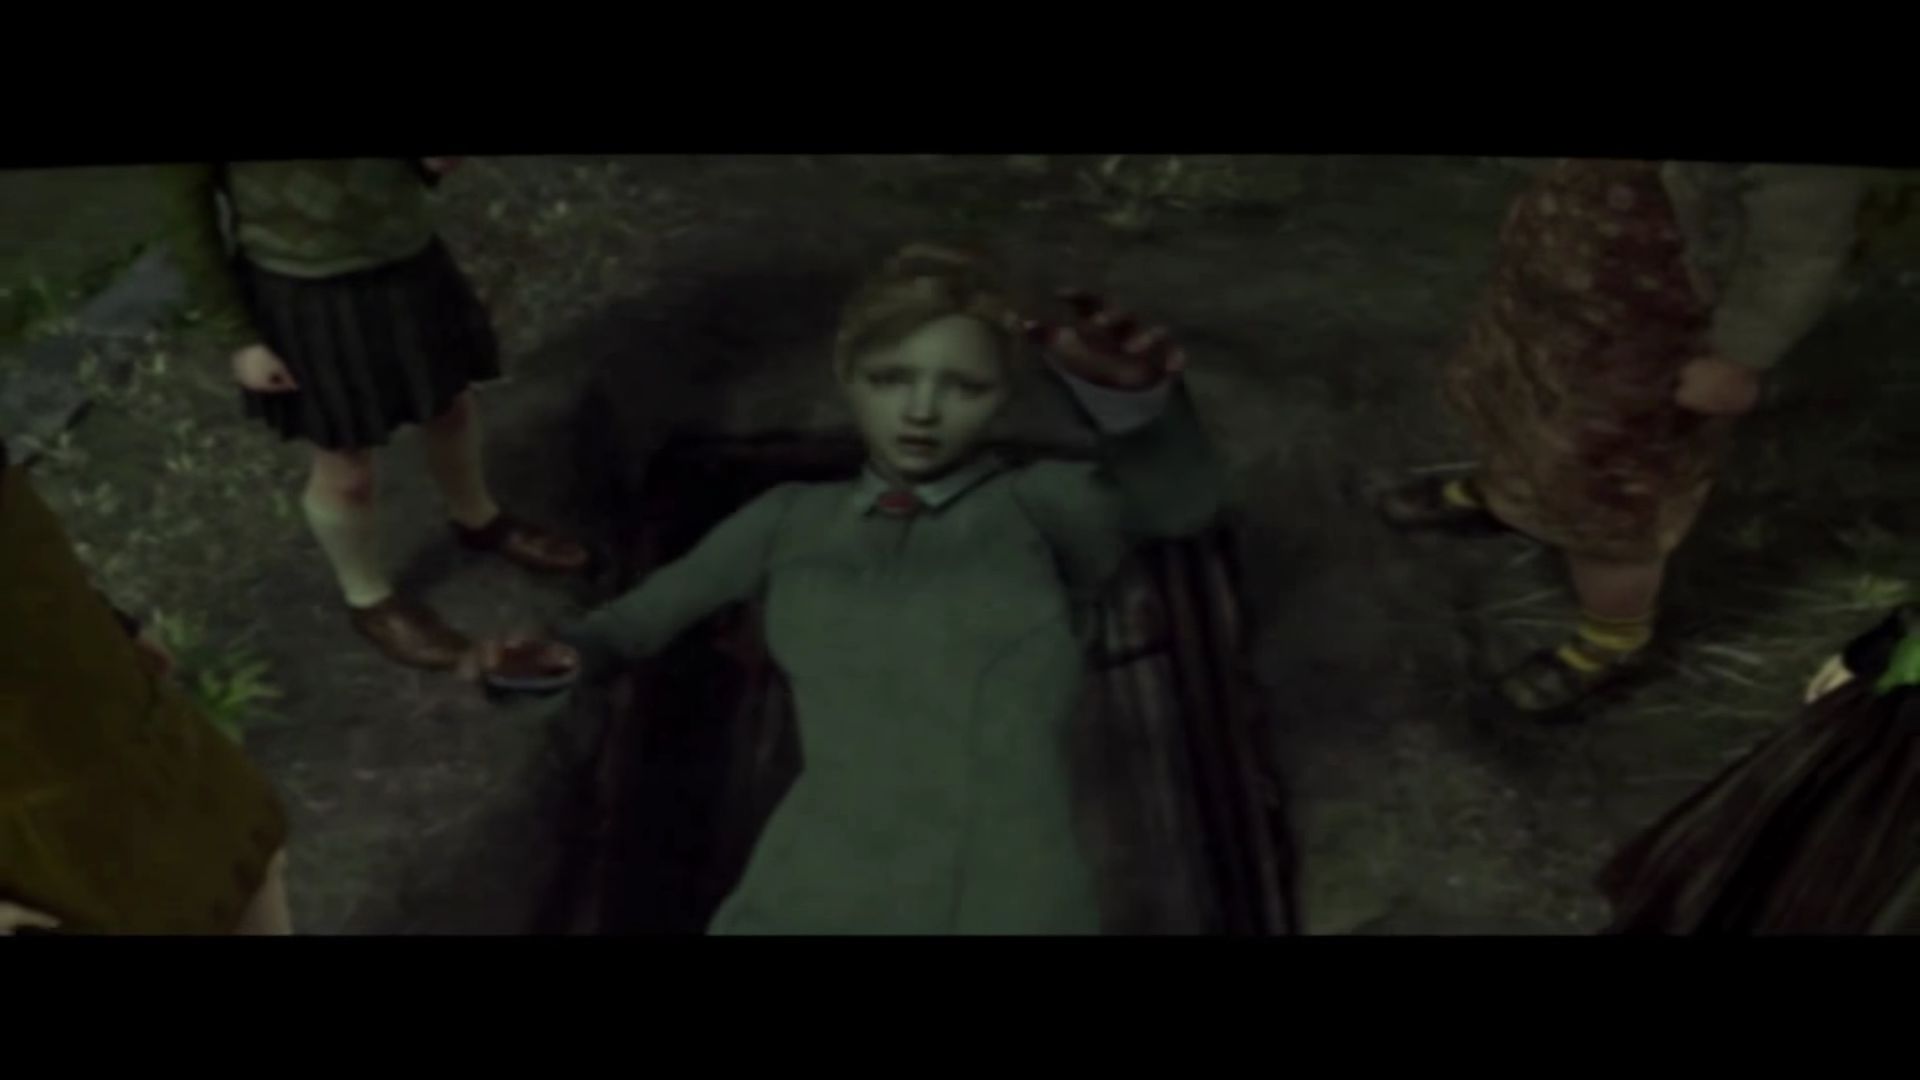 rule of rose pcsx2 download